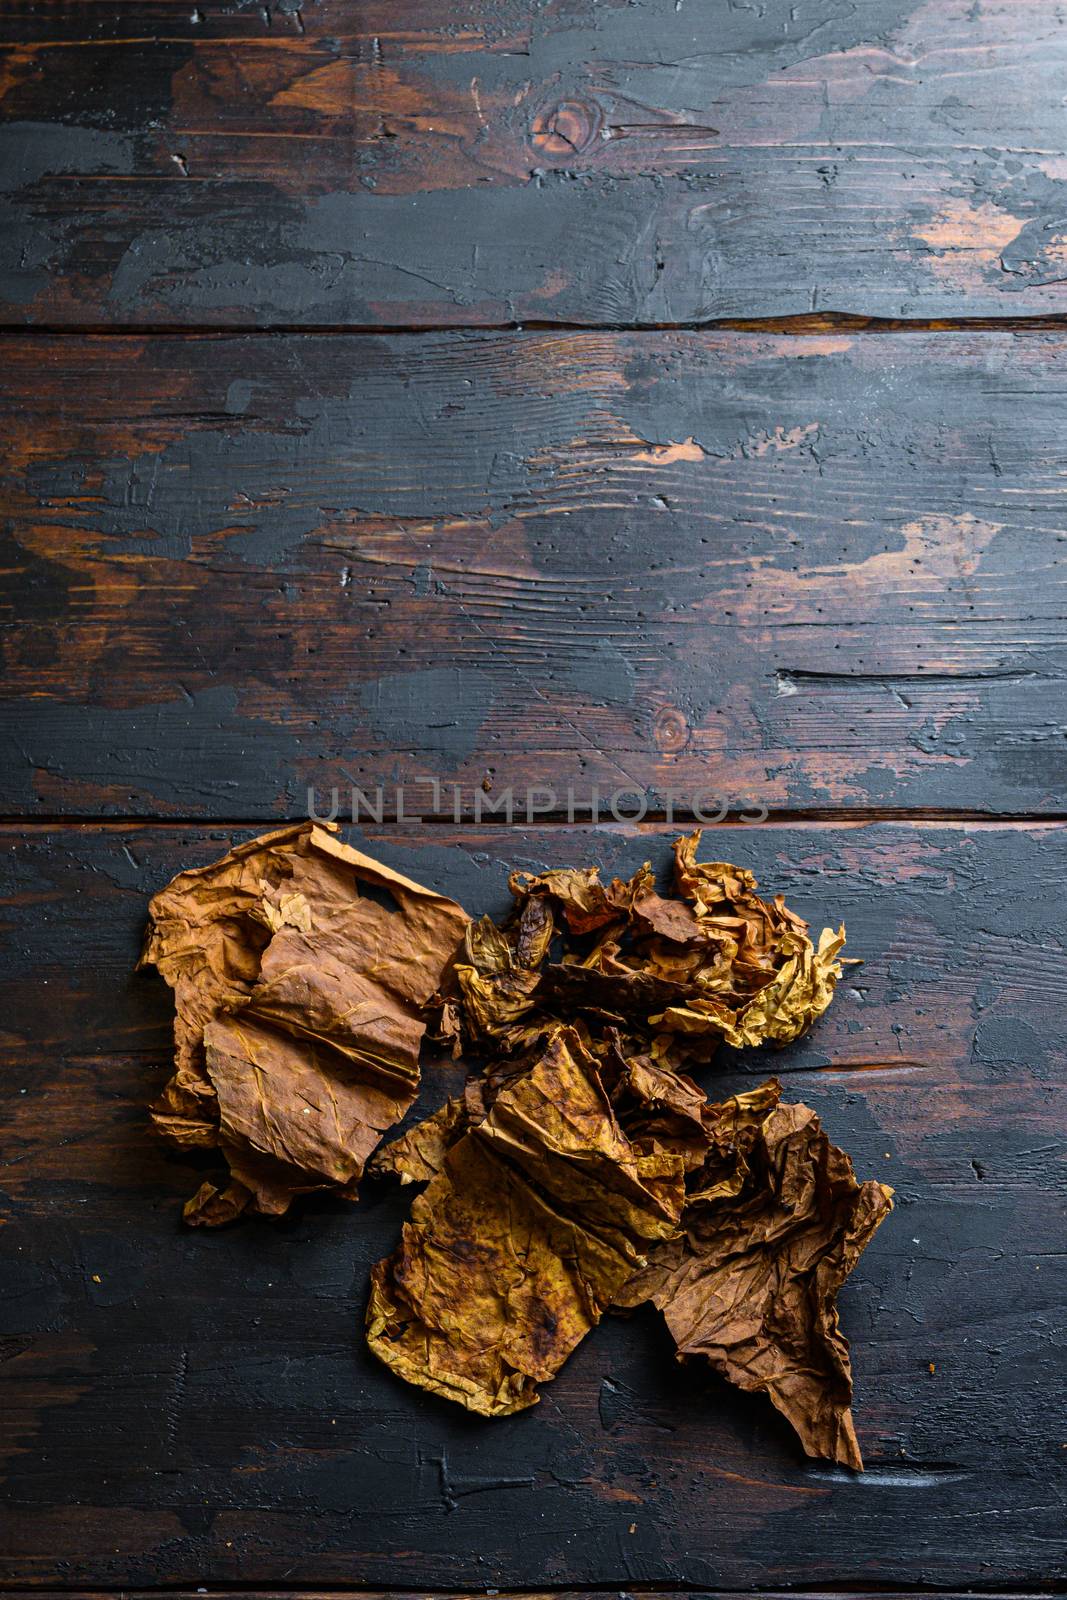 dry leafs tobacco Nicotiana tabacum and tobacco leaves on old wood planks table dark top view space for text by Ilianesolenyi